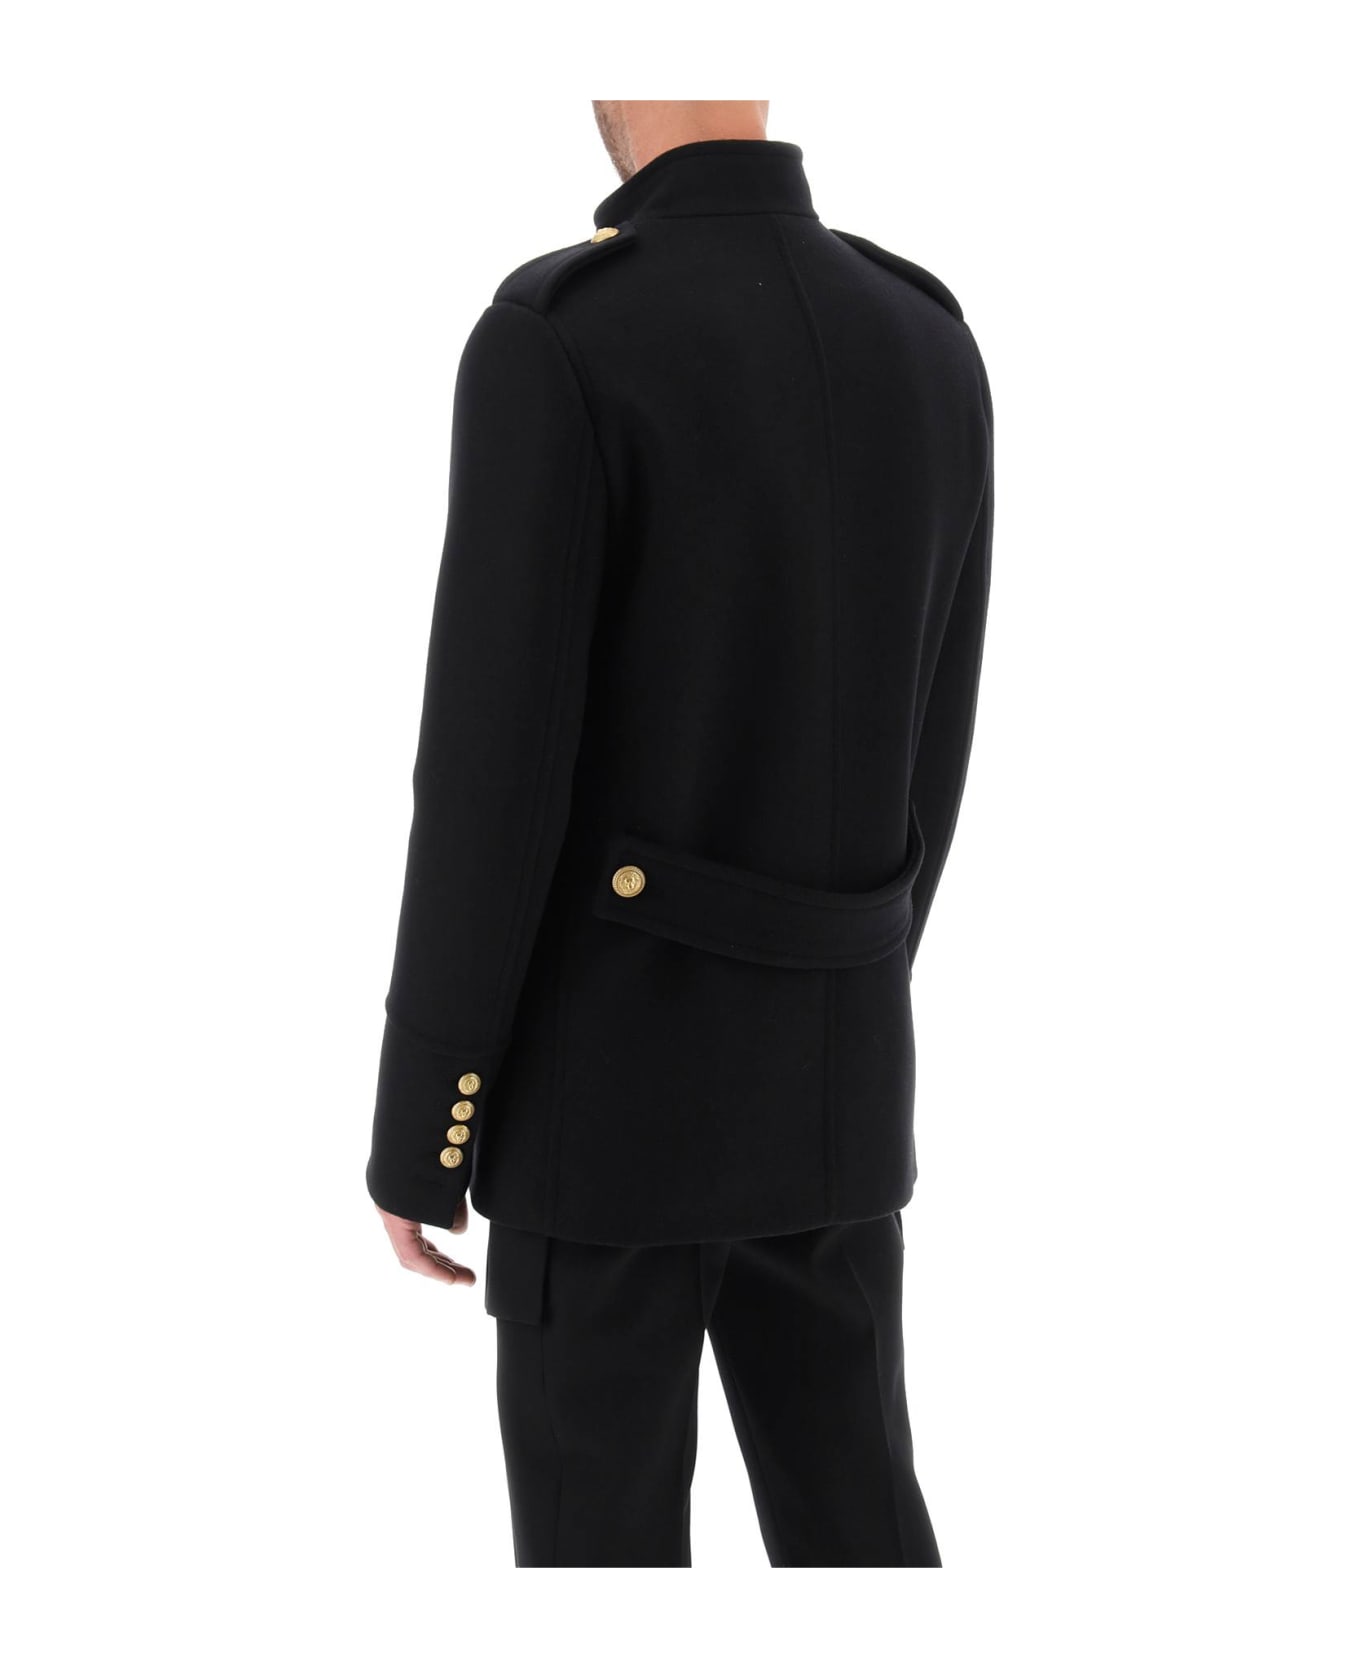 Balmain Double-breasted Peacoat With Embossed Buttons - Black コート